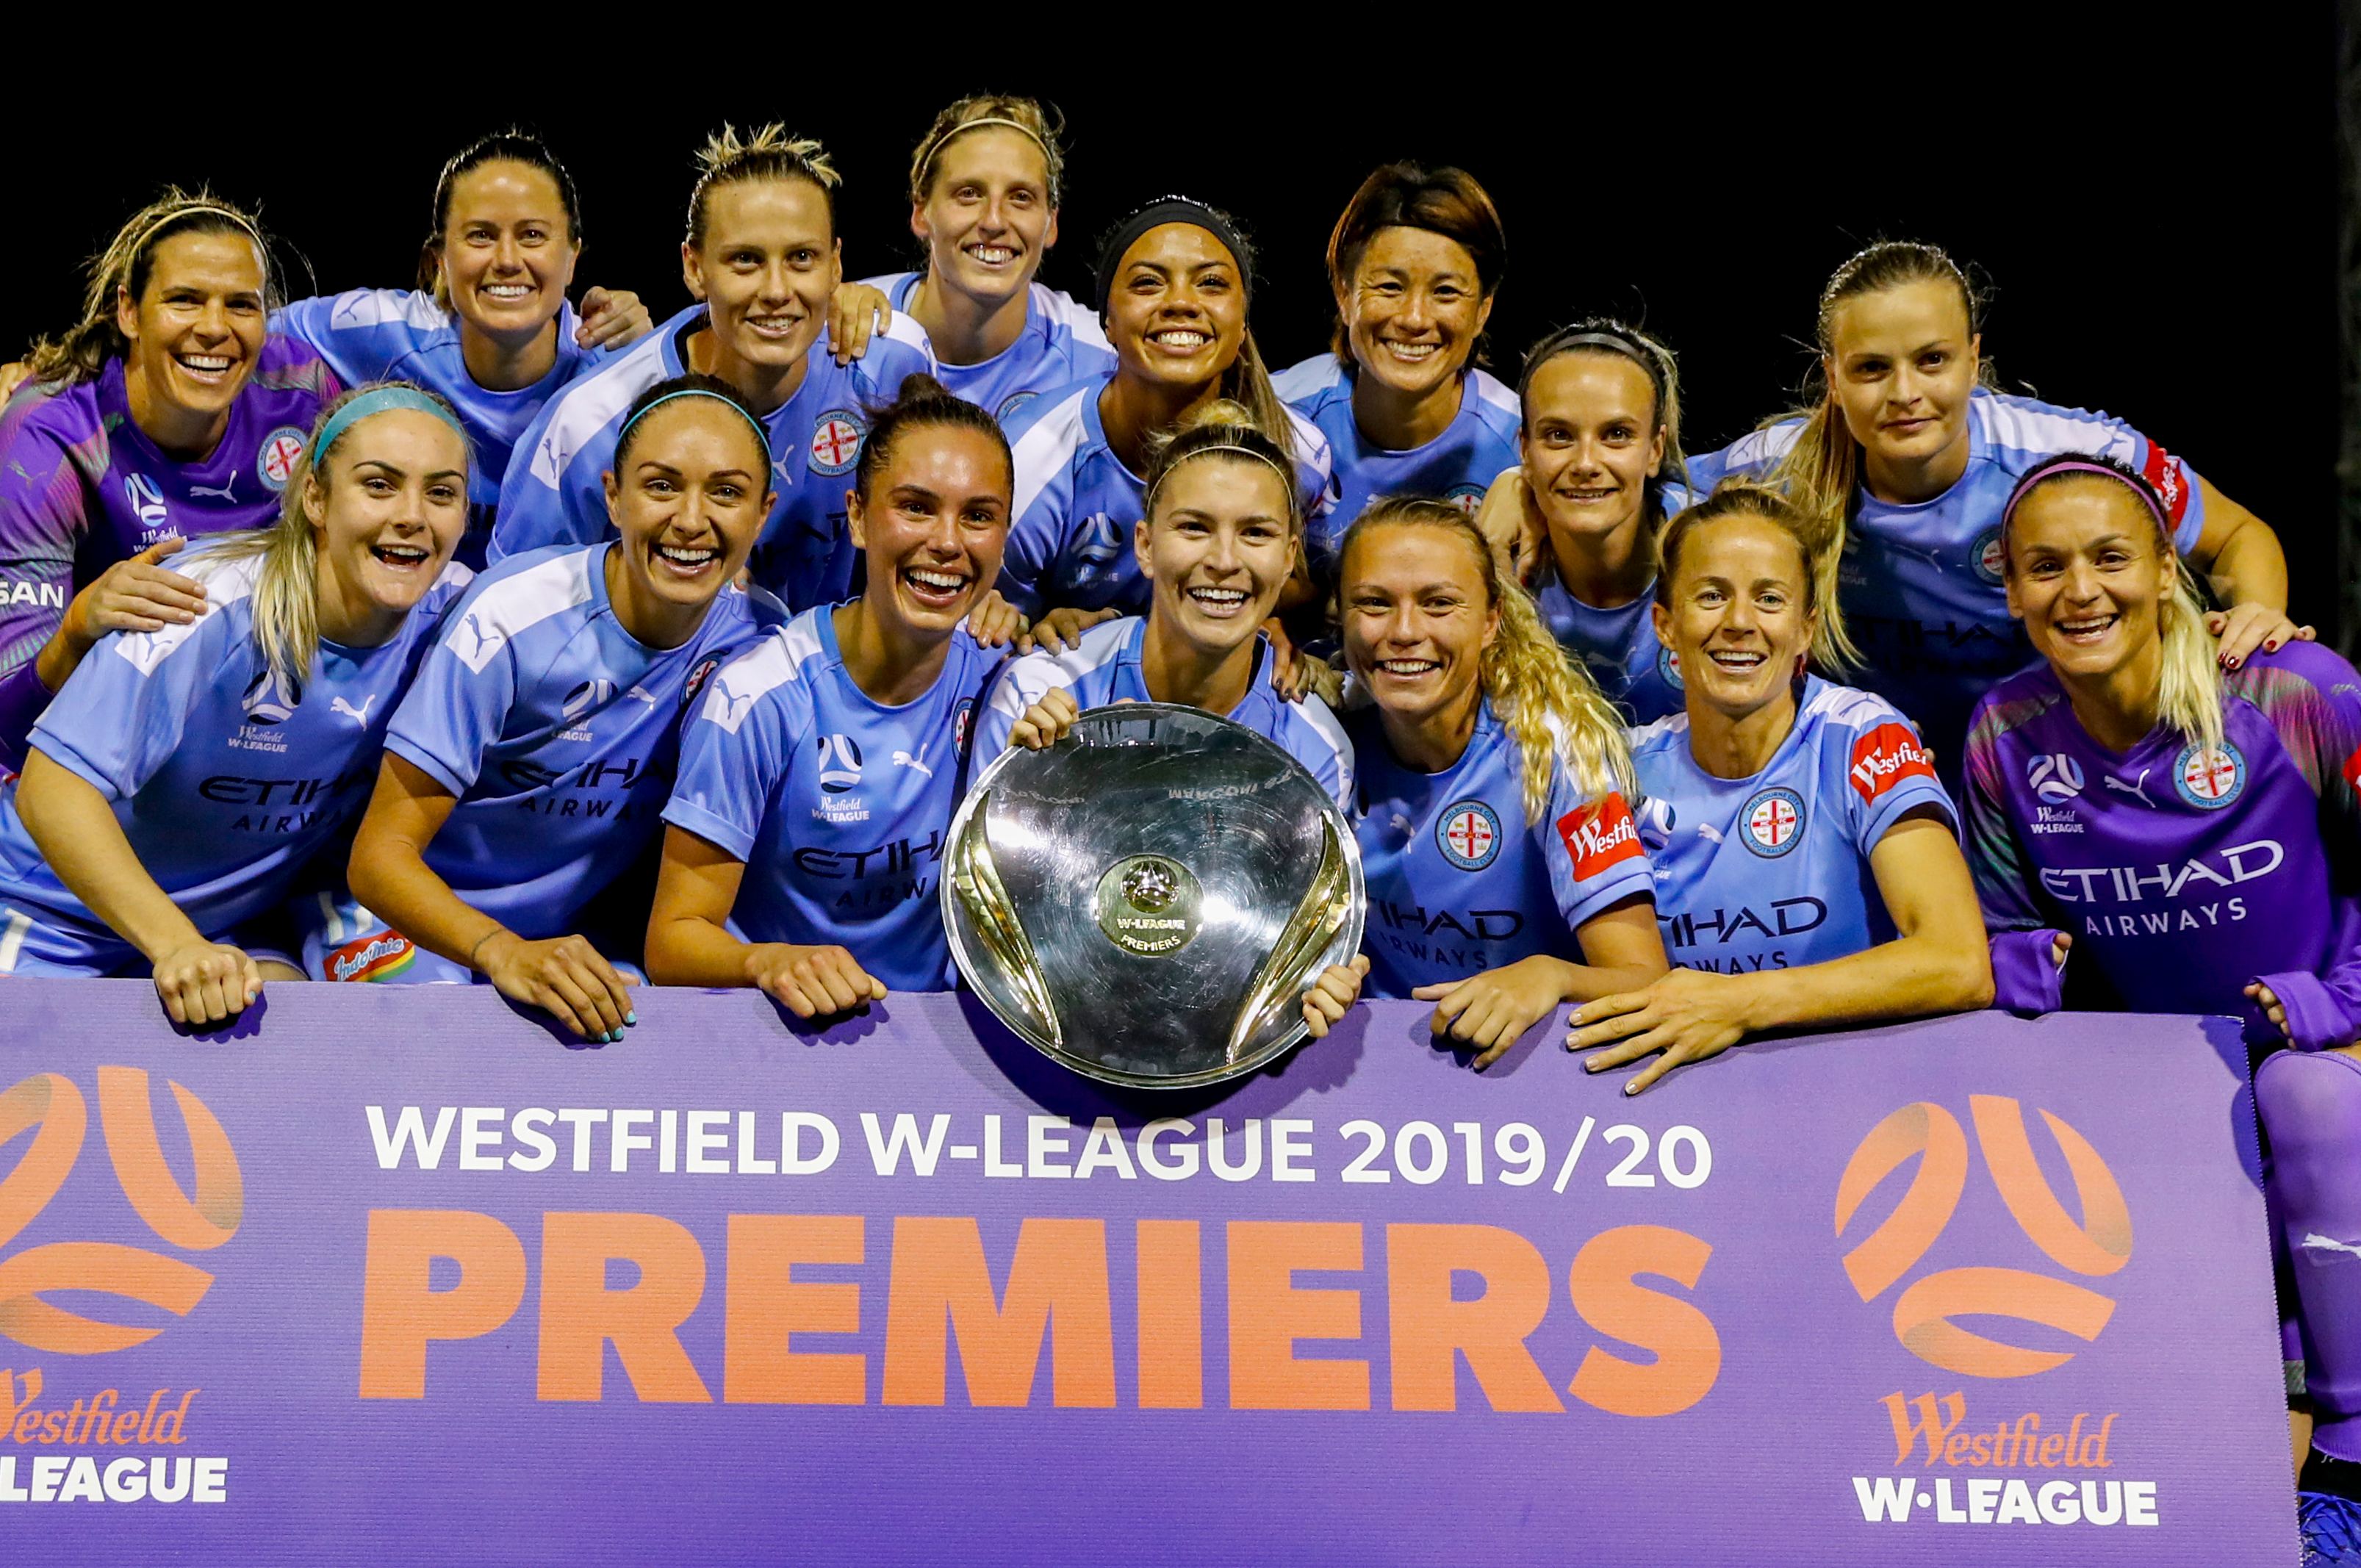 Melbourne City get their hands on the Premiers' Plate